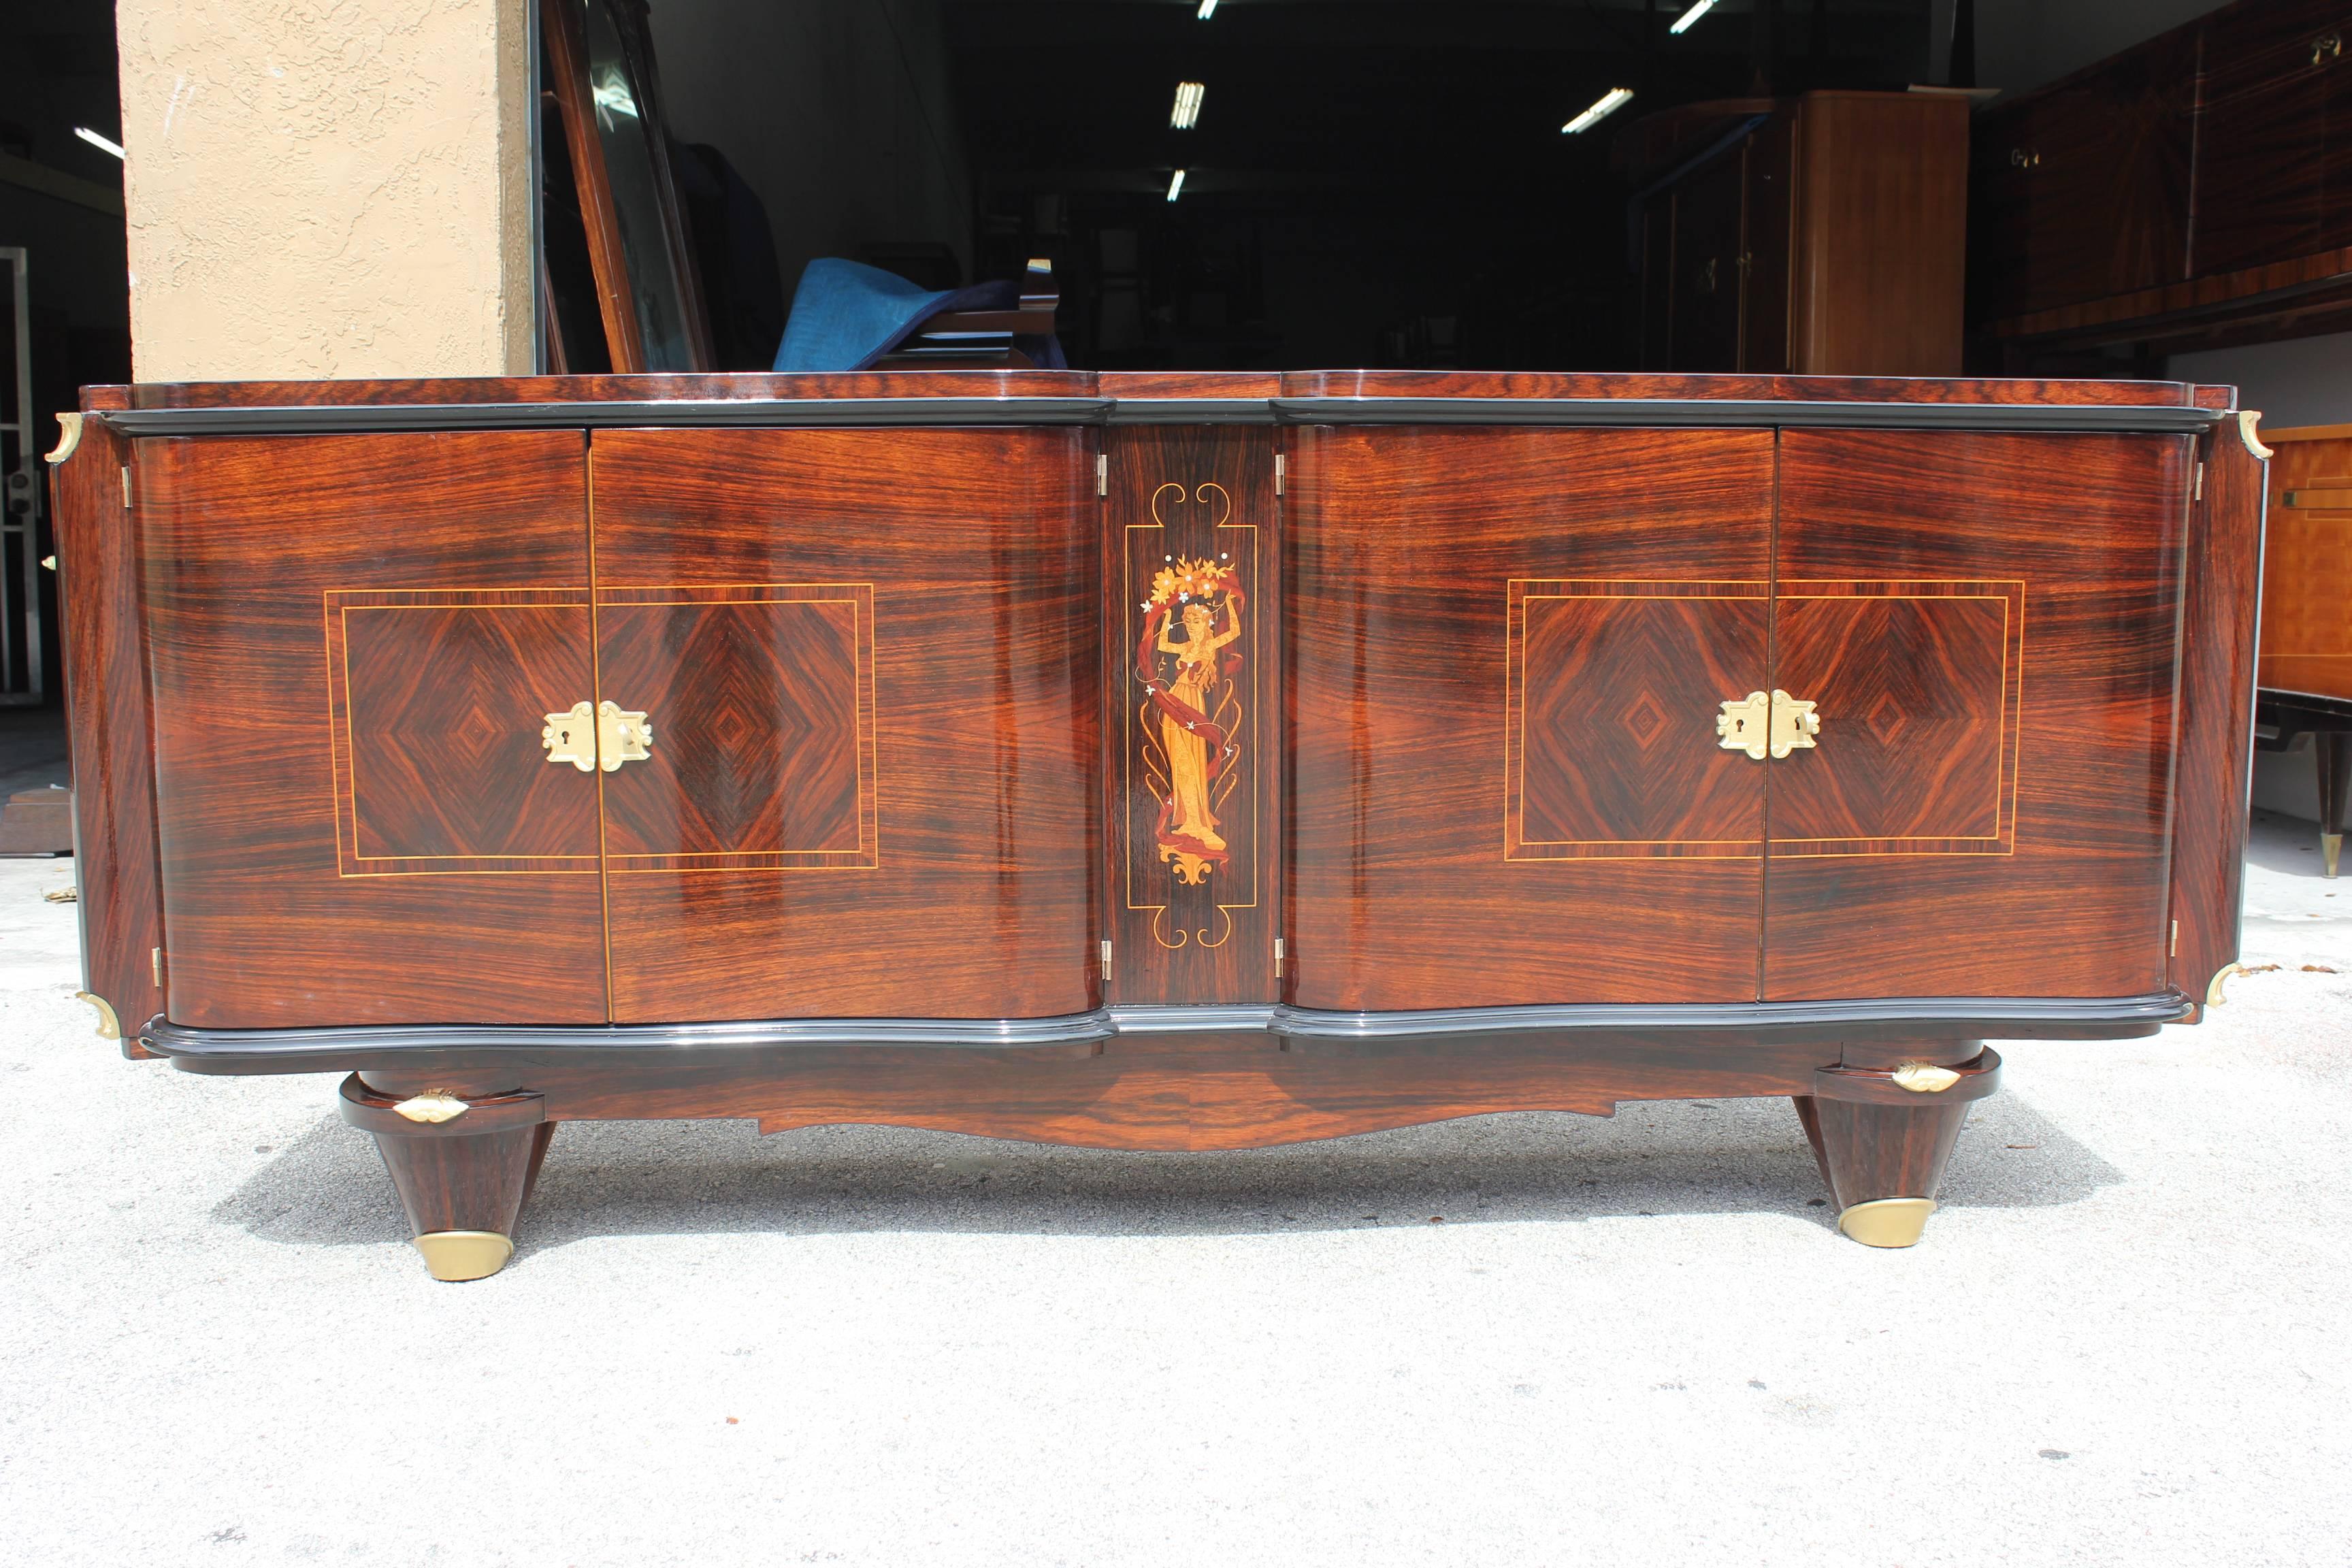 A stunning French Art Deco sideboard / buffet  Palisander Rio with Mother of Pearl Detail, circa 1940s. Style of the master, Jules Leleu. Center female figure with Mother of Pearl accents. Elaborate hardware.(beautiful restoration and refinished